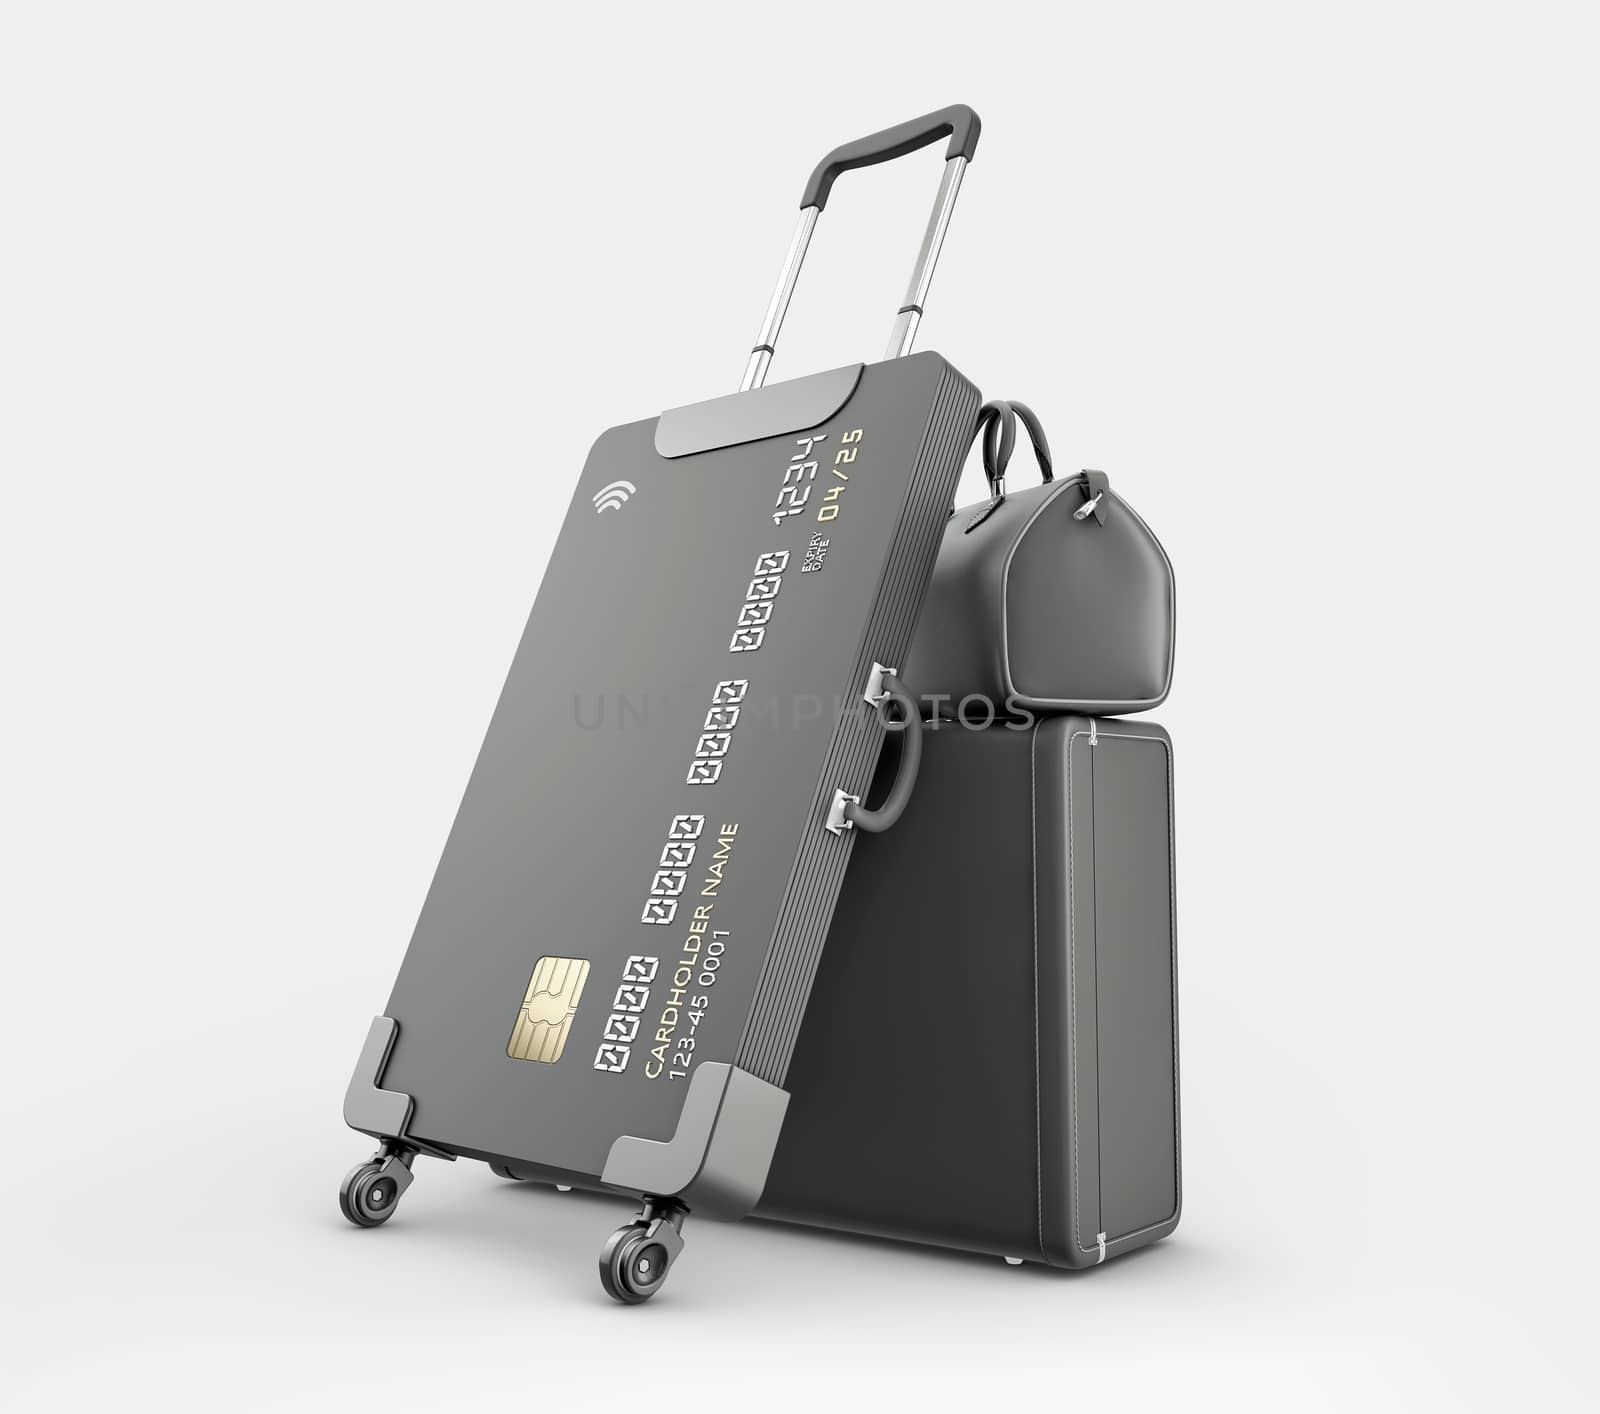 3d Rendering of Credit Card Suitcase with luggage include clipping path by tussik